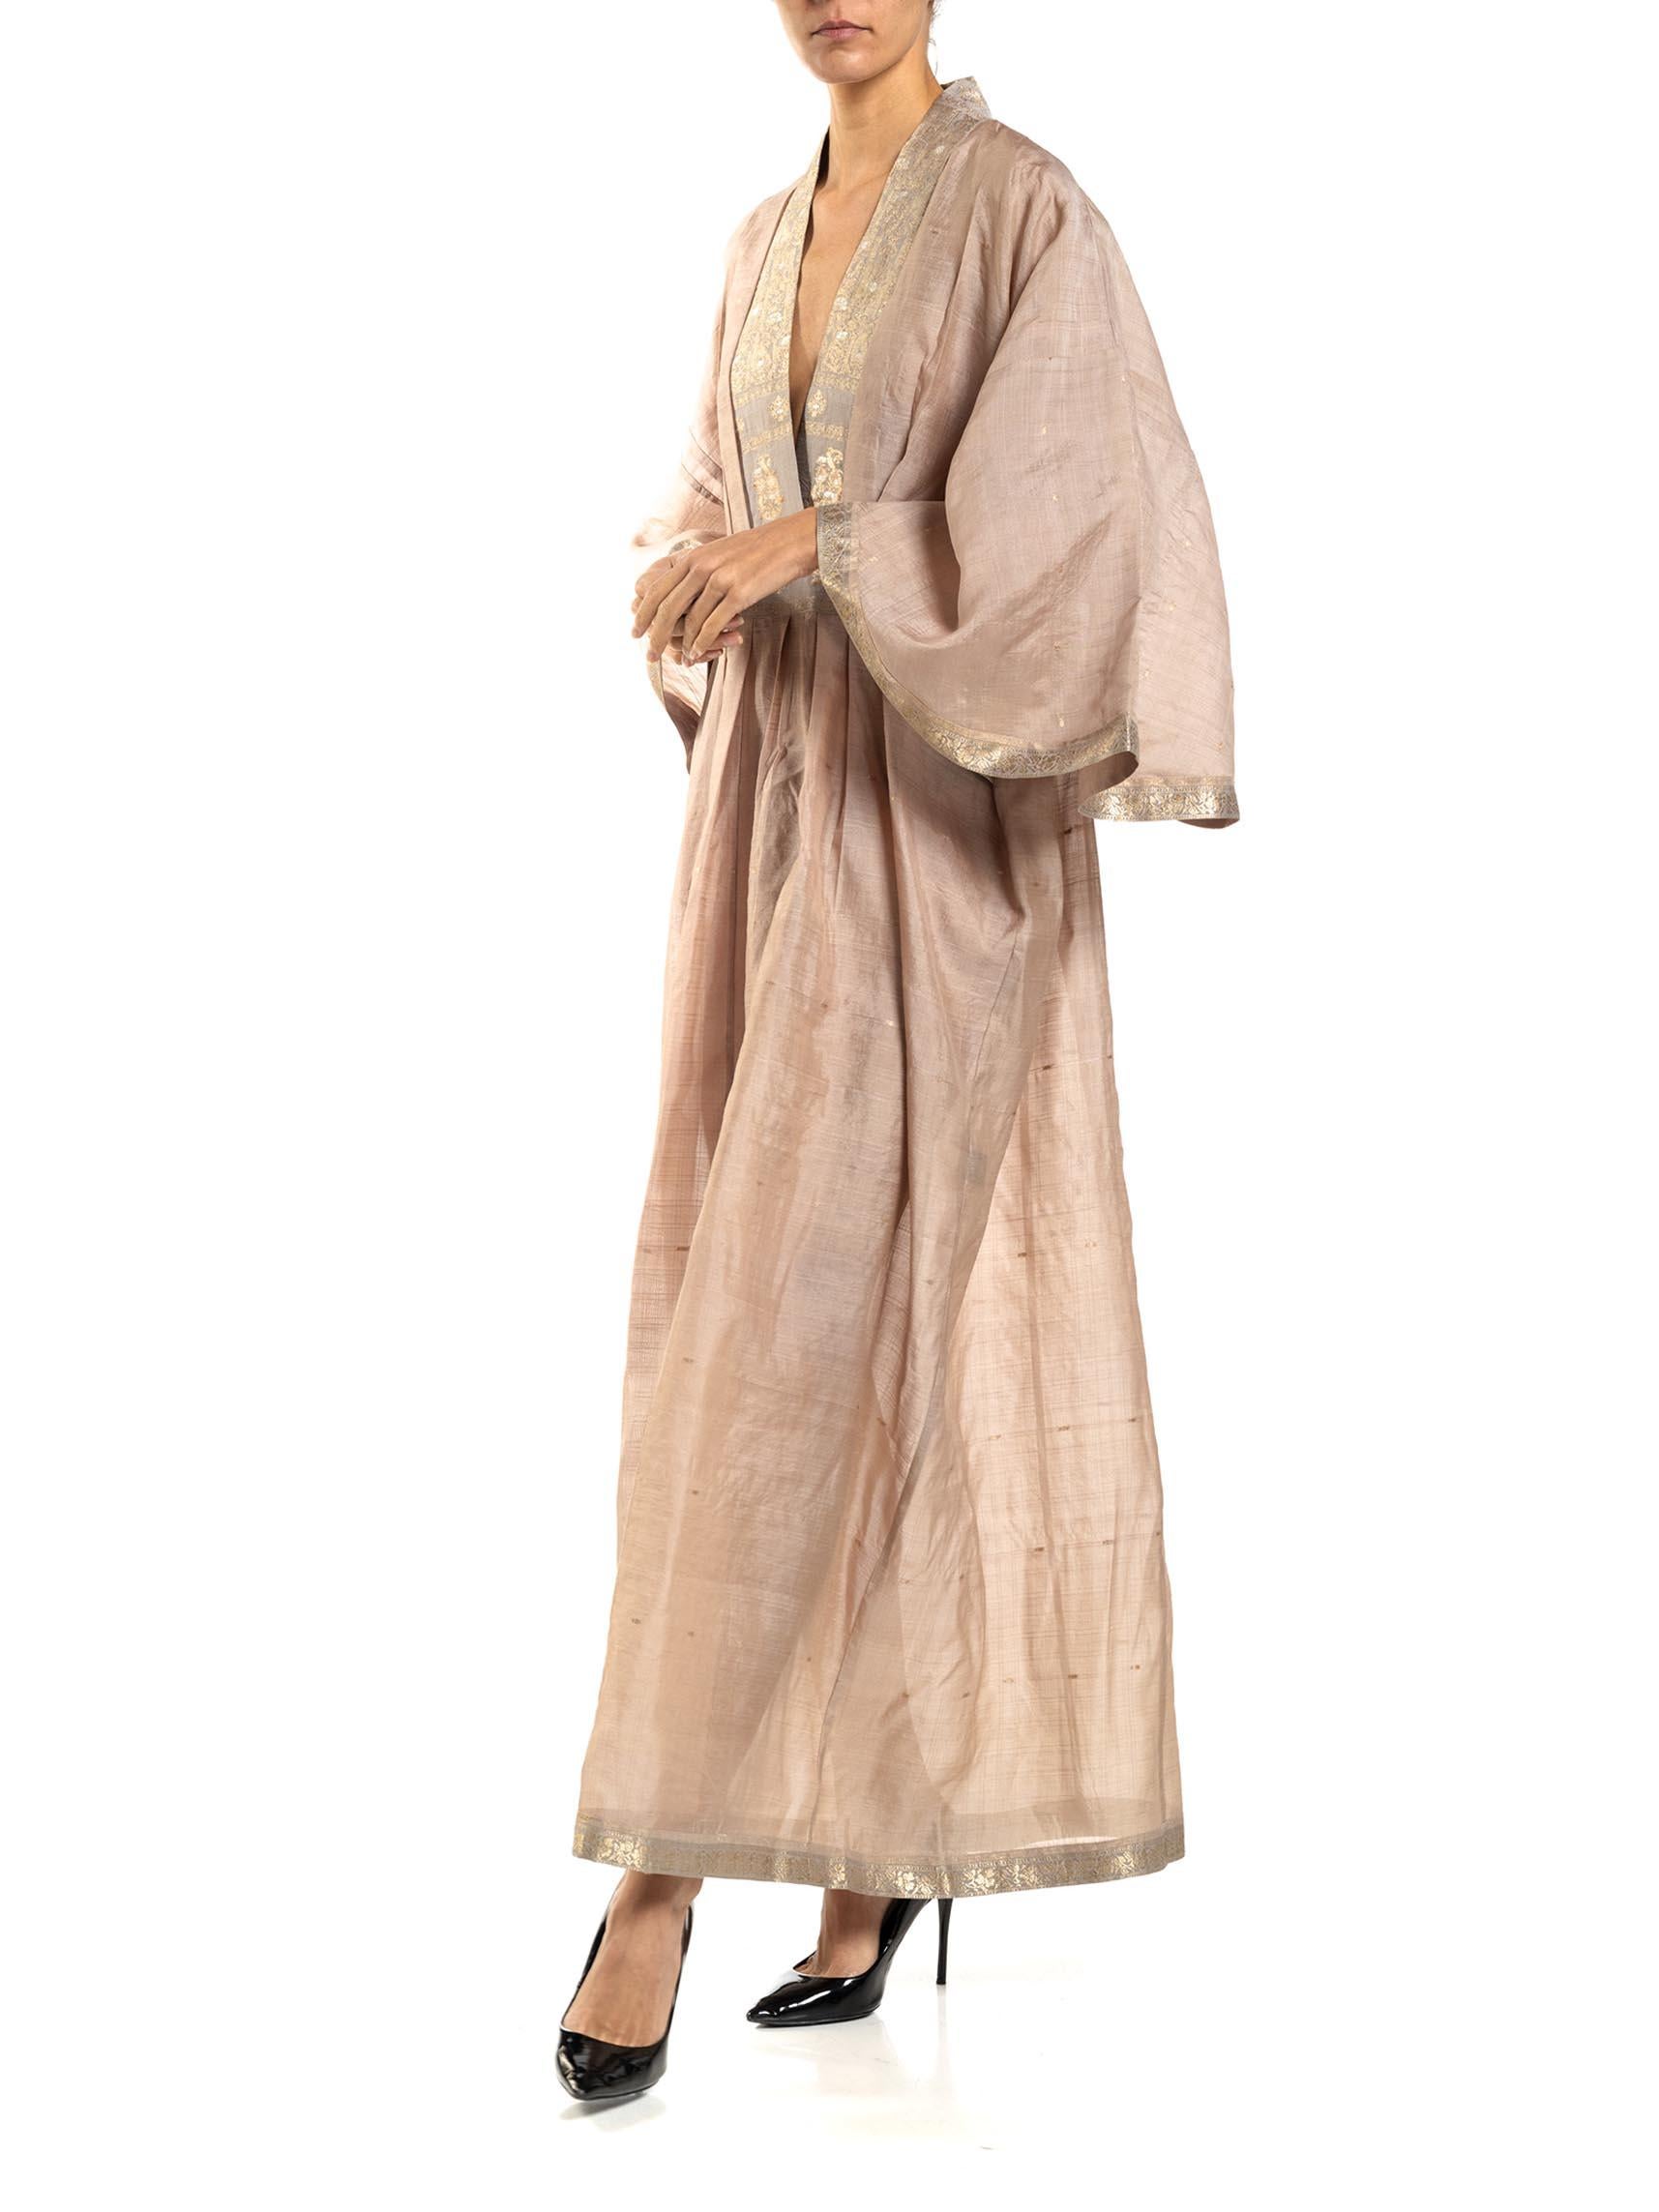 Women's MORPHEW COLLECTION Dusty Pink Silk Kaftan Made From Vintage Sari For Sale